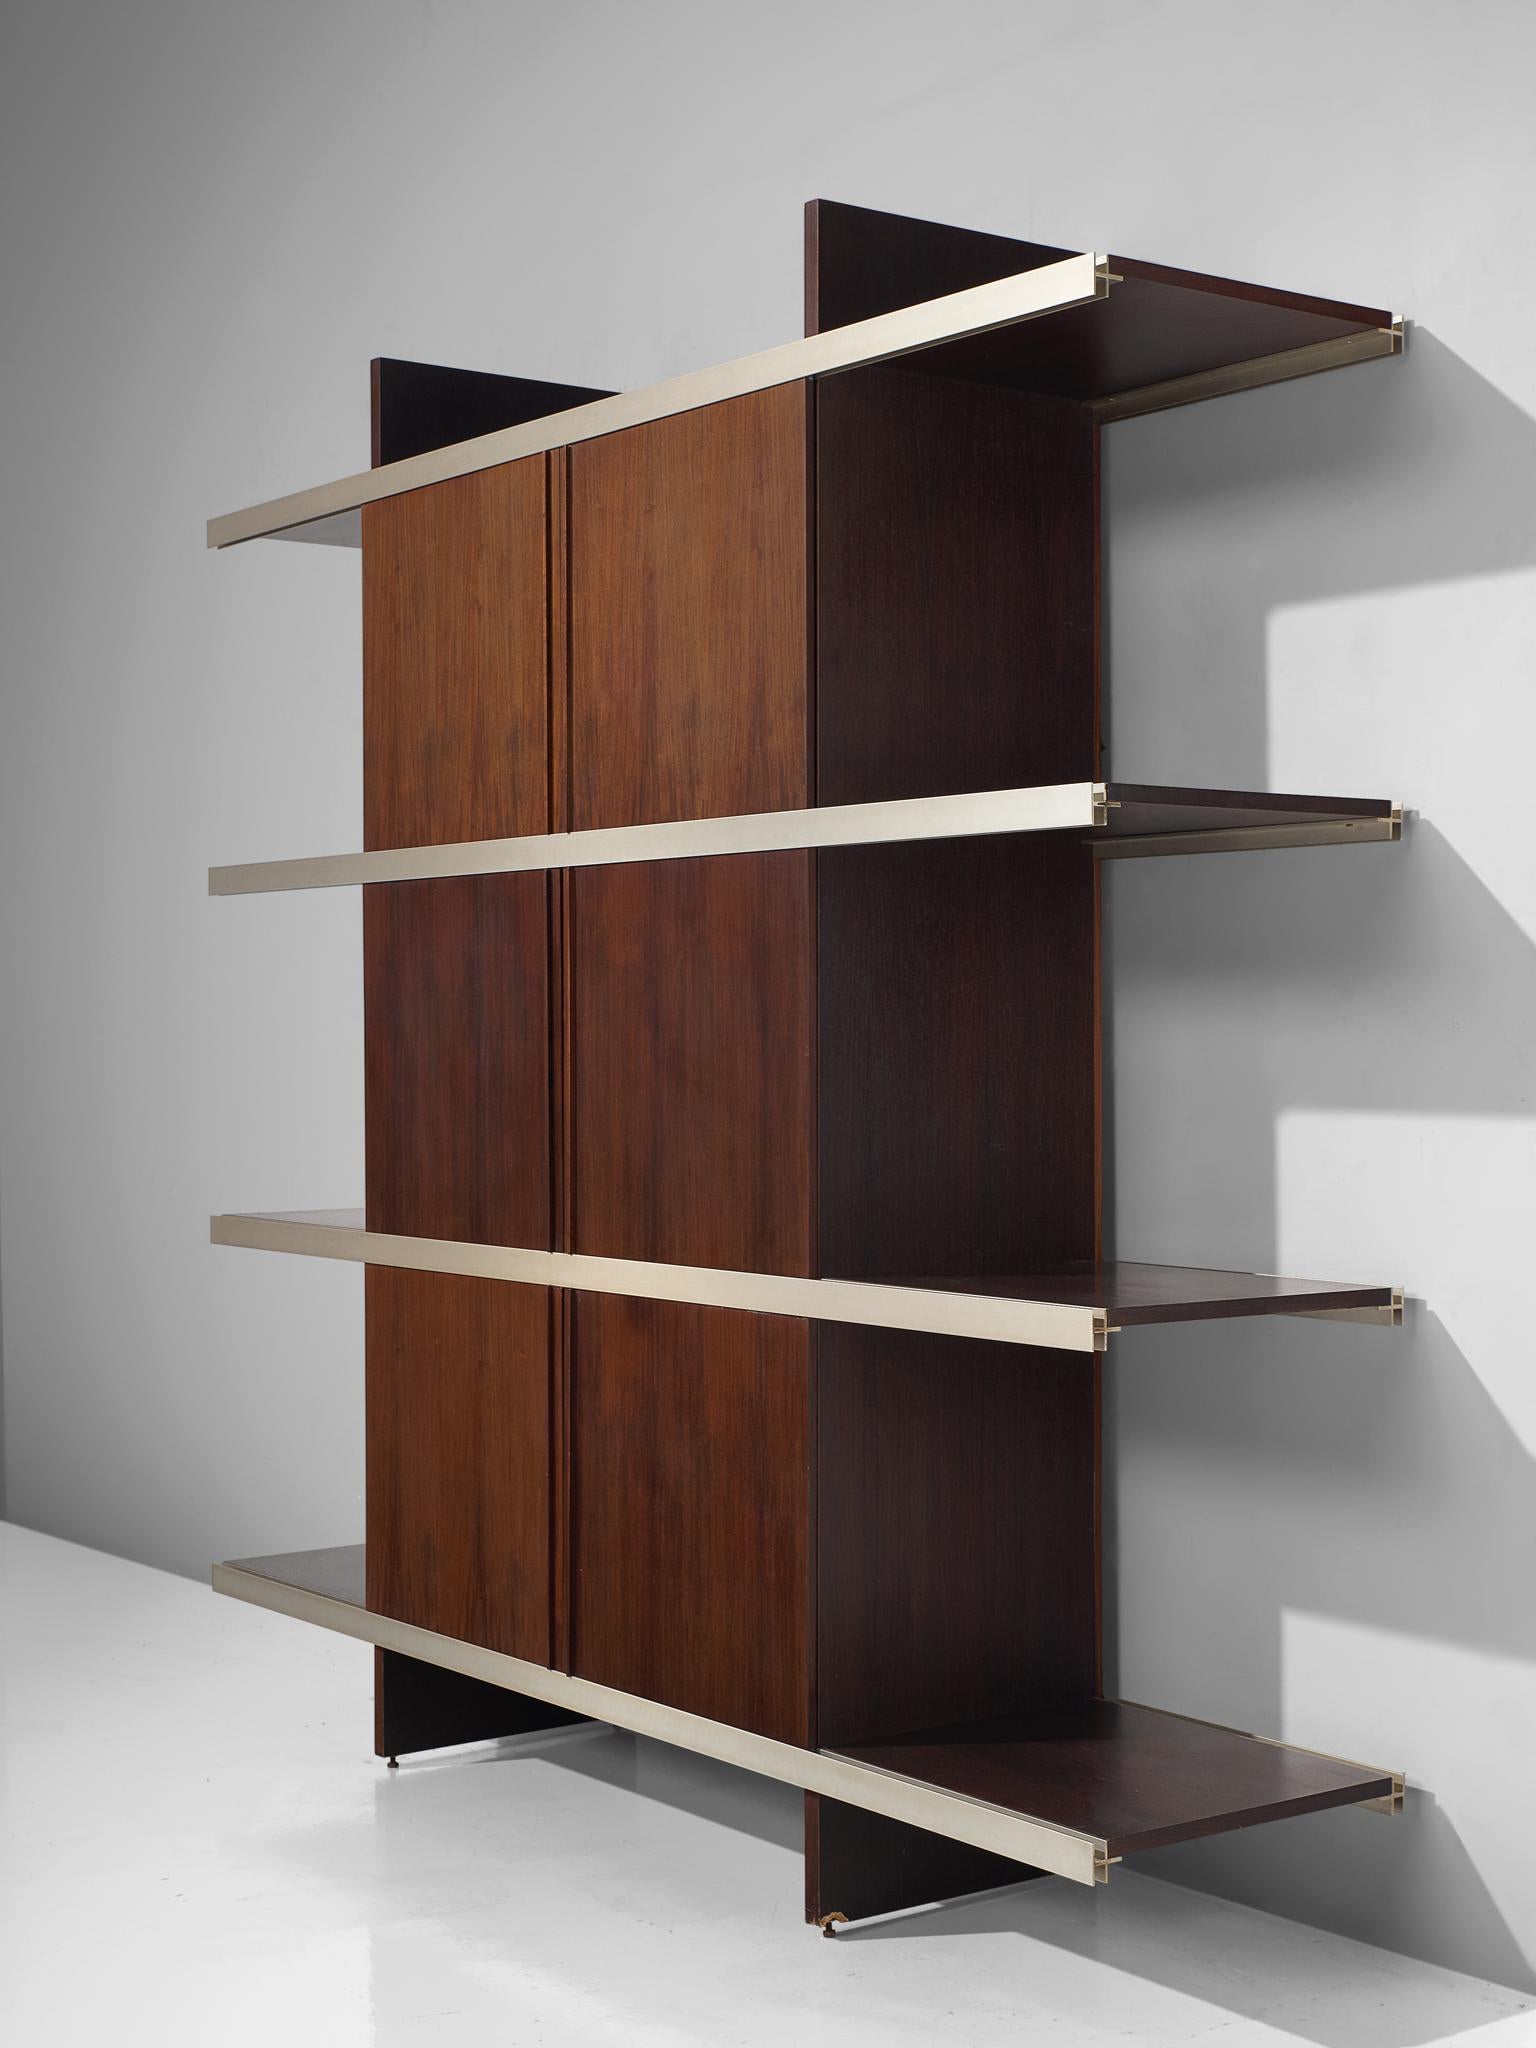 Angelo Mangiarotti for Poltronova, cabinet/bookcase from the Multiuse series, exotic wood, aluminum, Italy, 1960s.

Beautiful bookcase/sideboard of the Multiuse series that Mangiarotti designed for Poltronova. Multiuse series stands for versatile